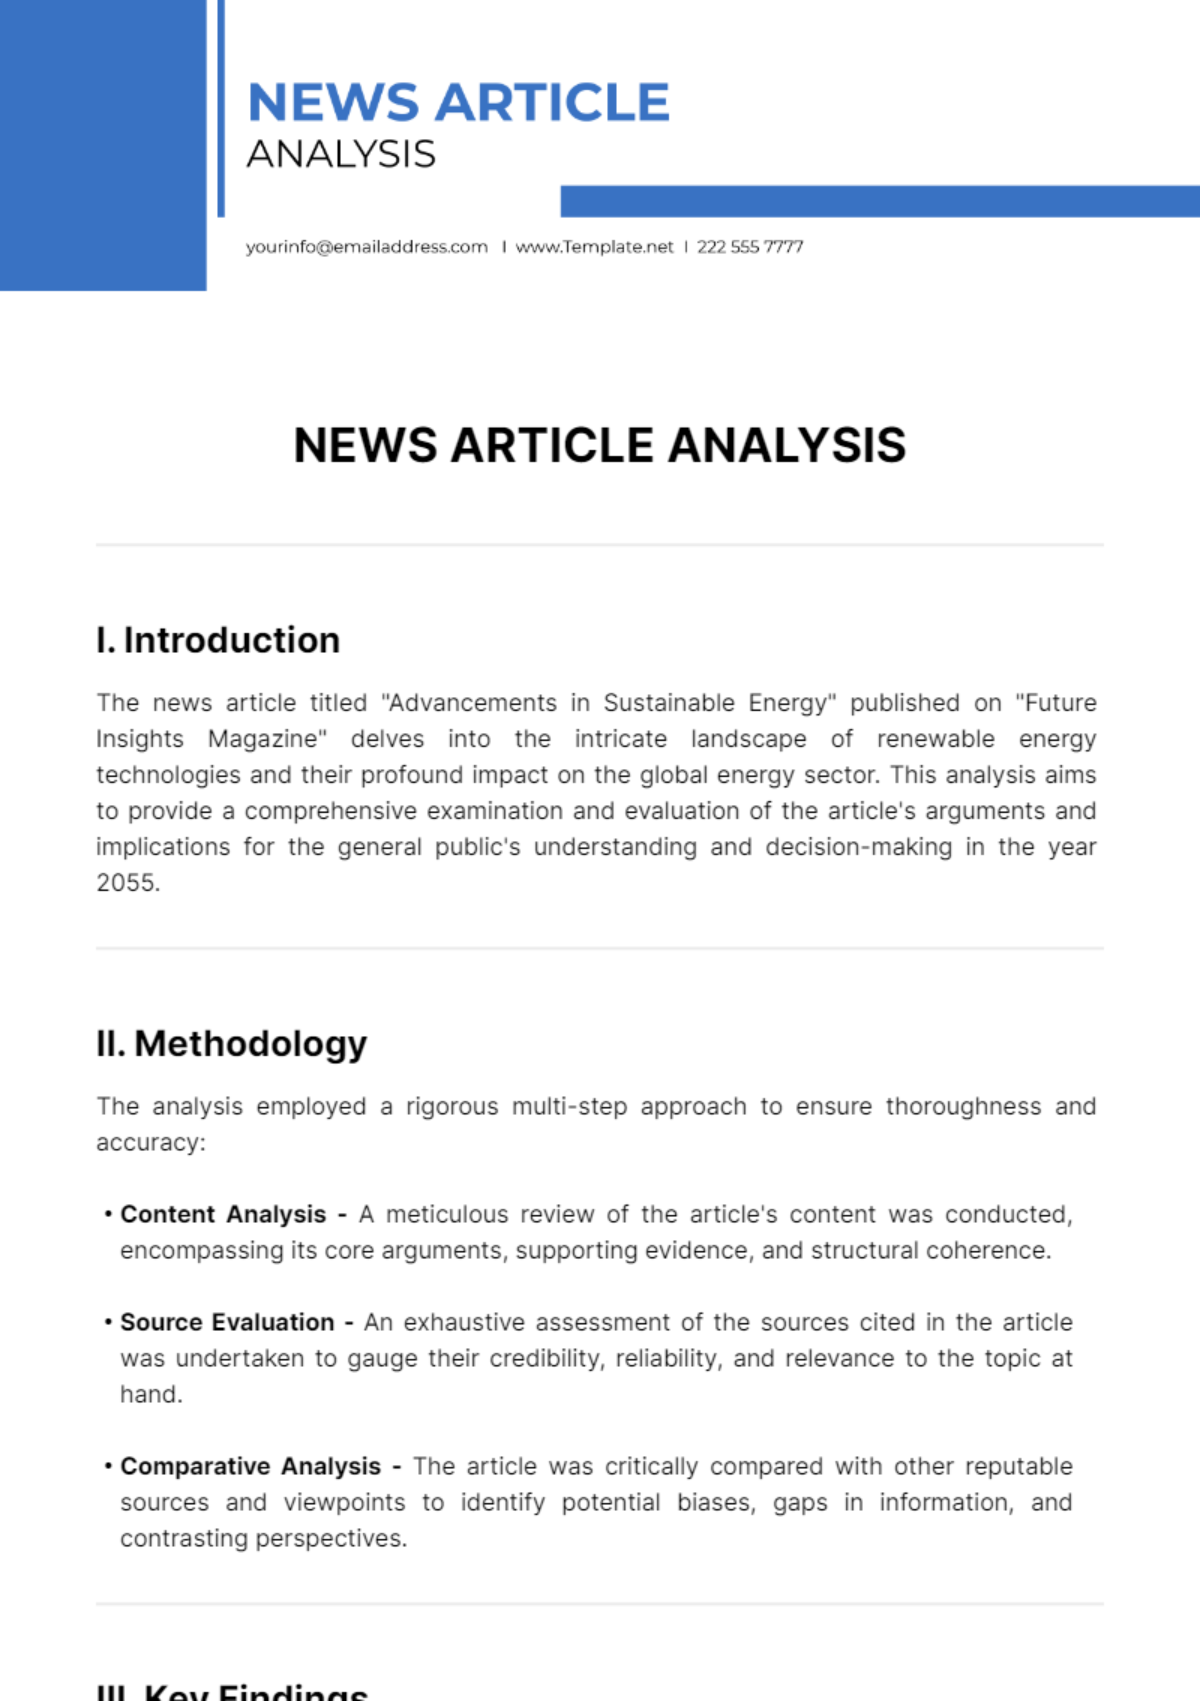 News Article Analysis Template